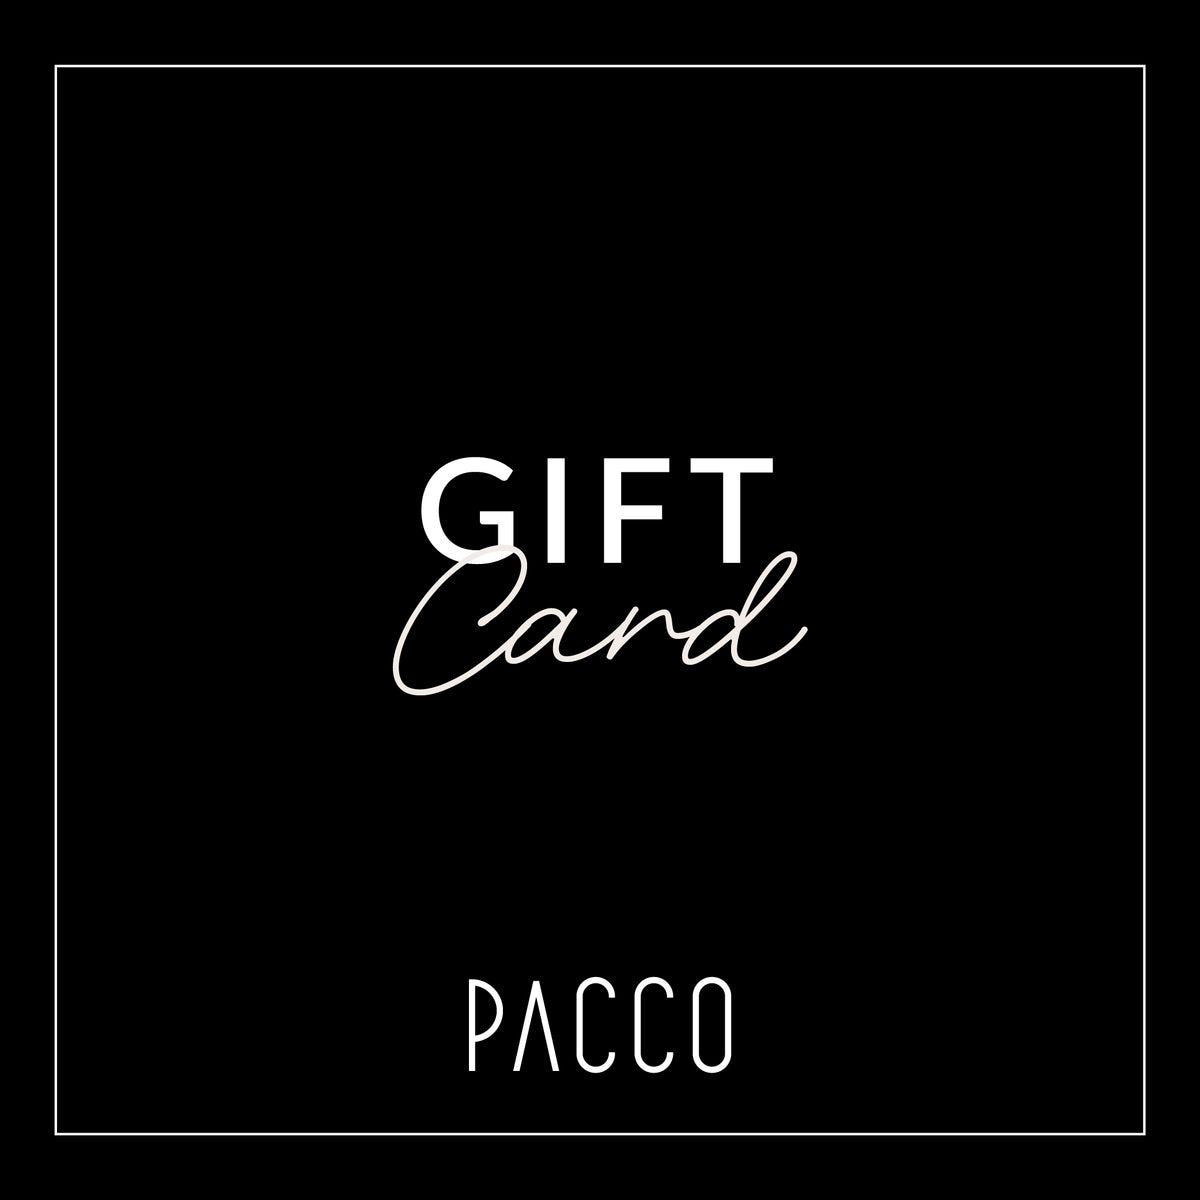 #giftcard